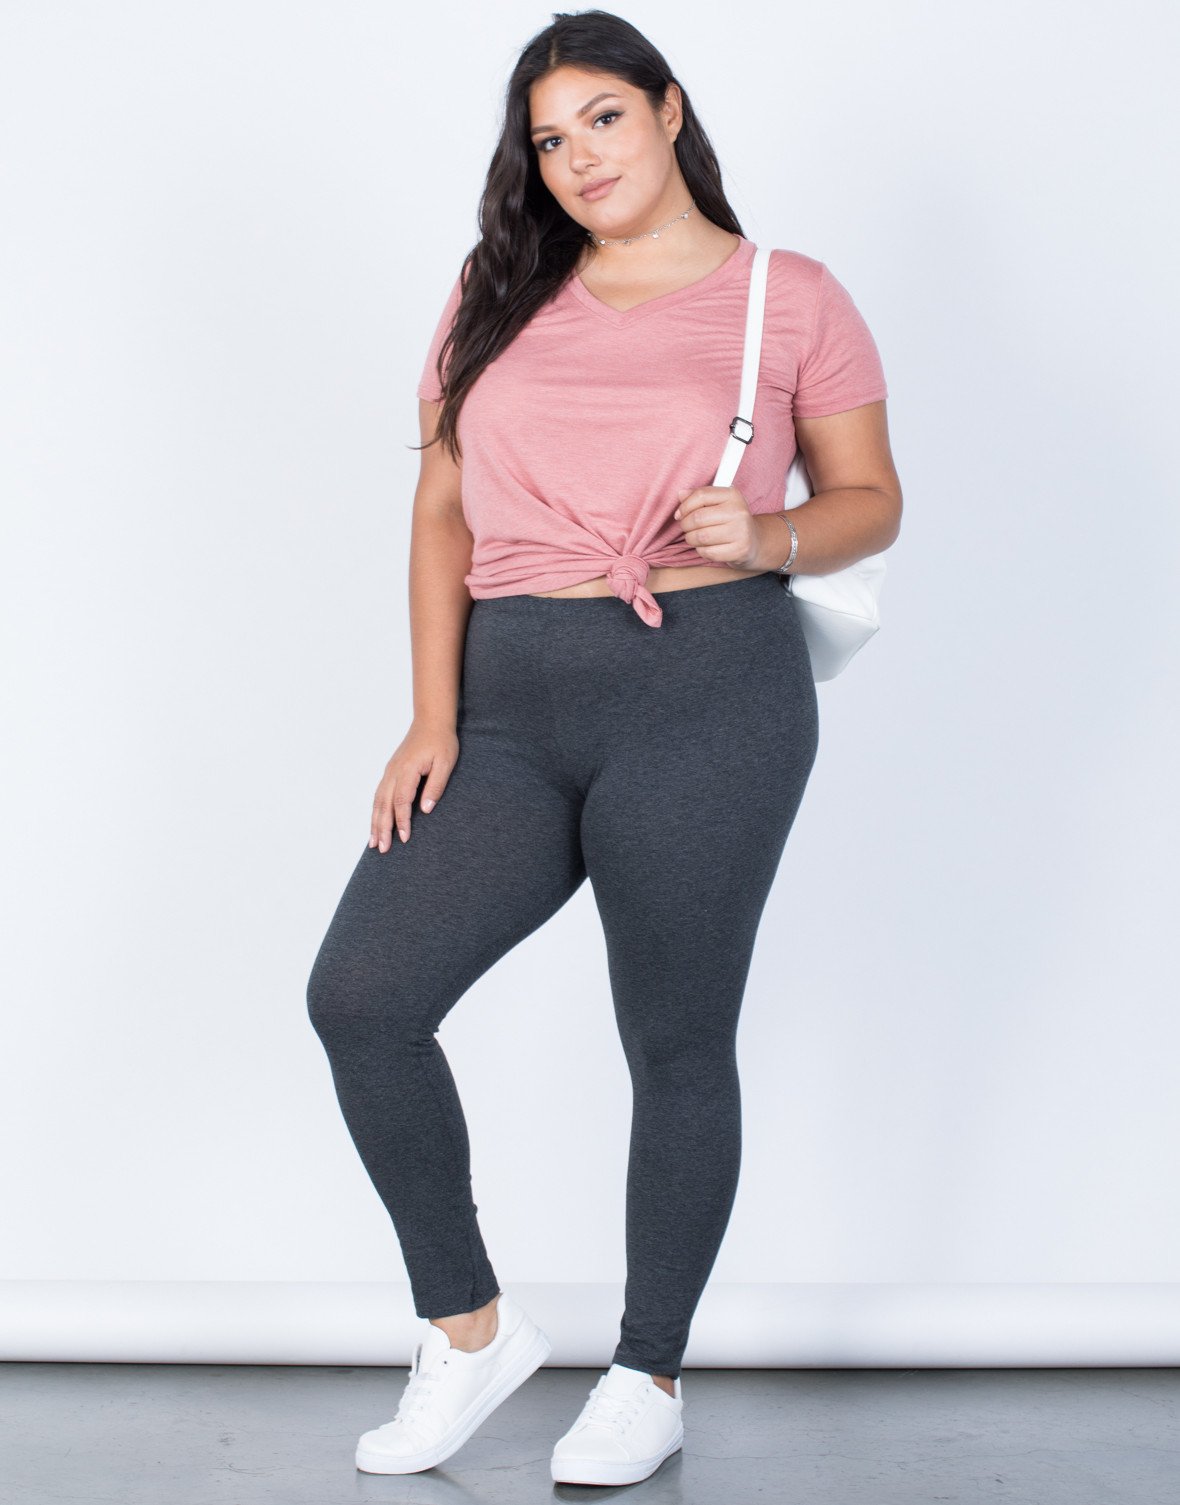 Look Slimmer and taller with plus size leggings